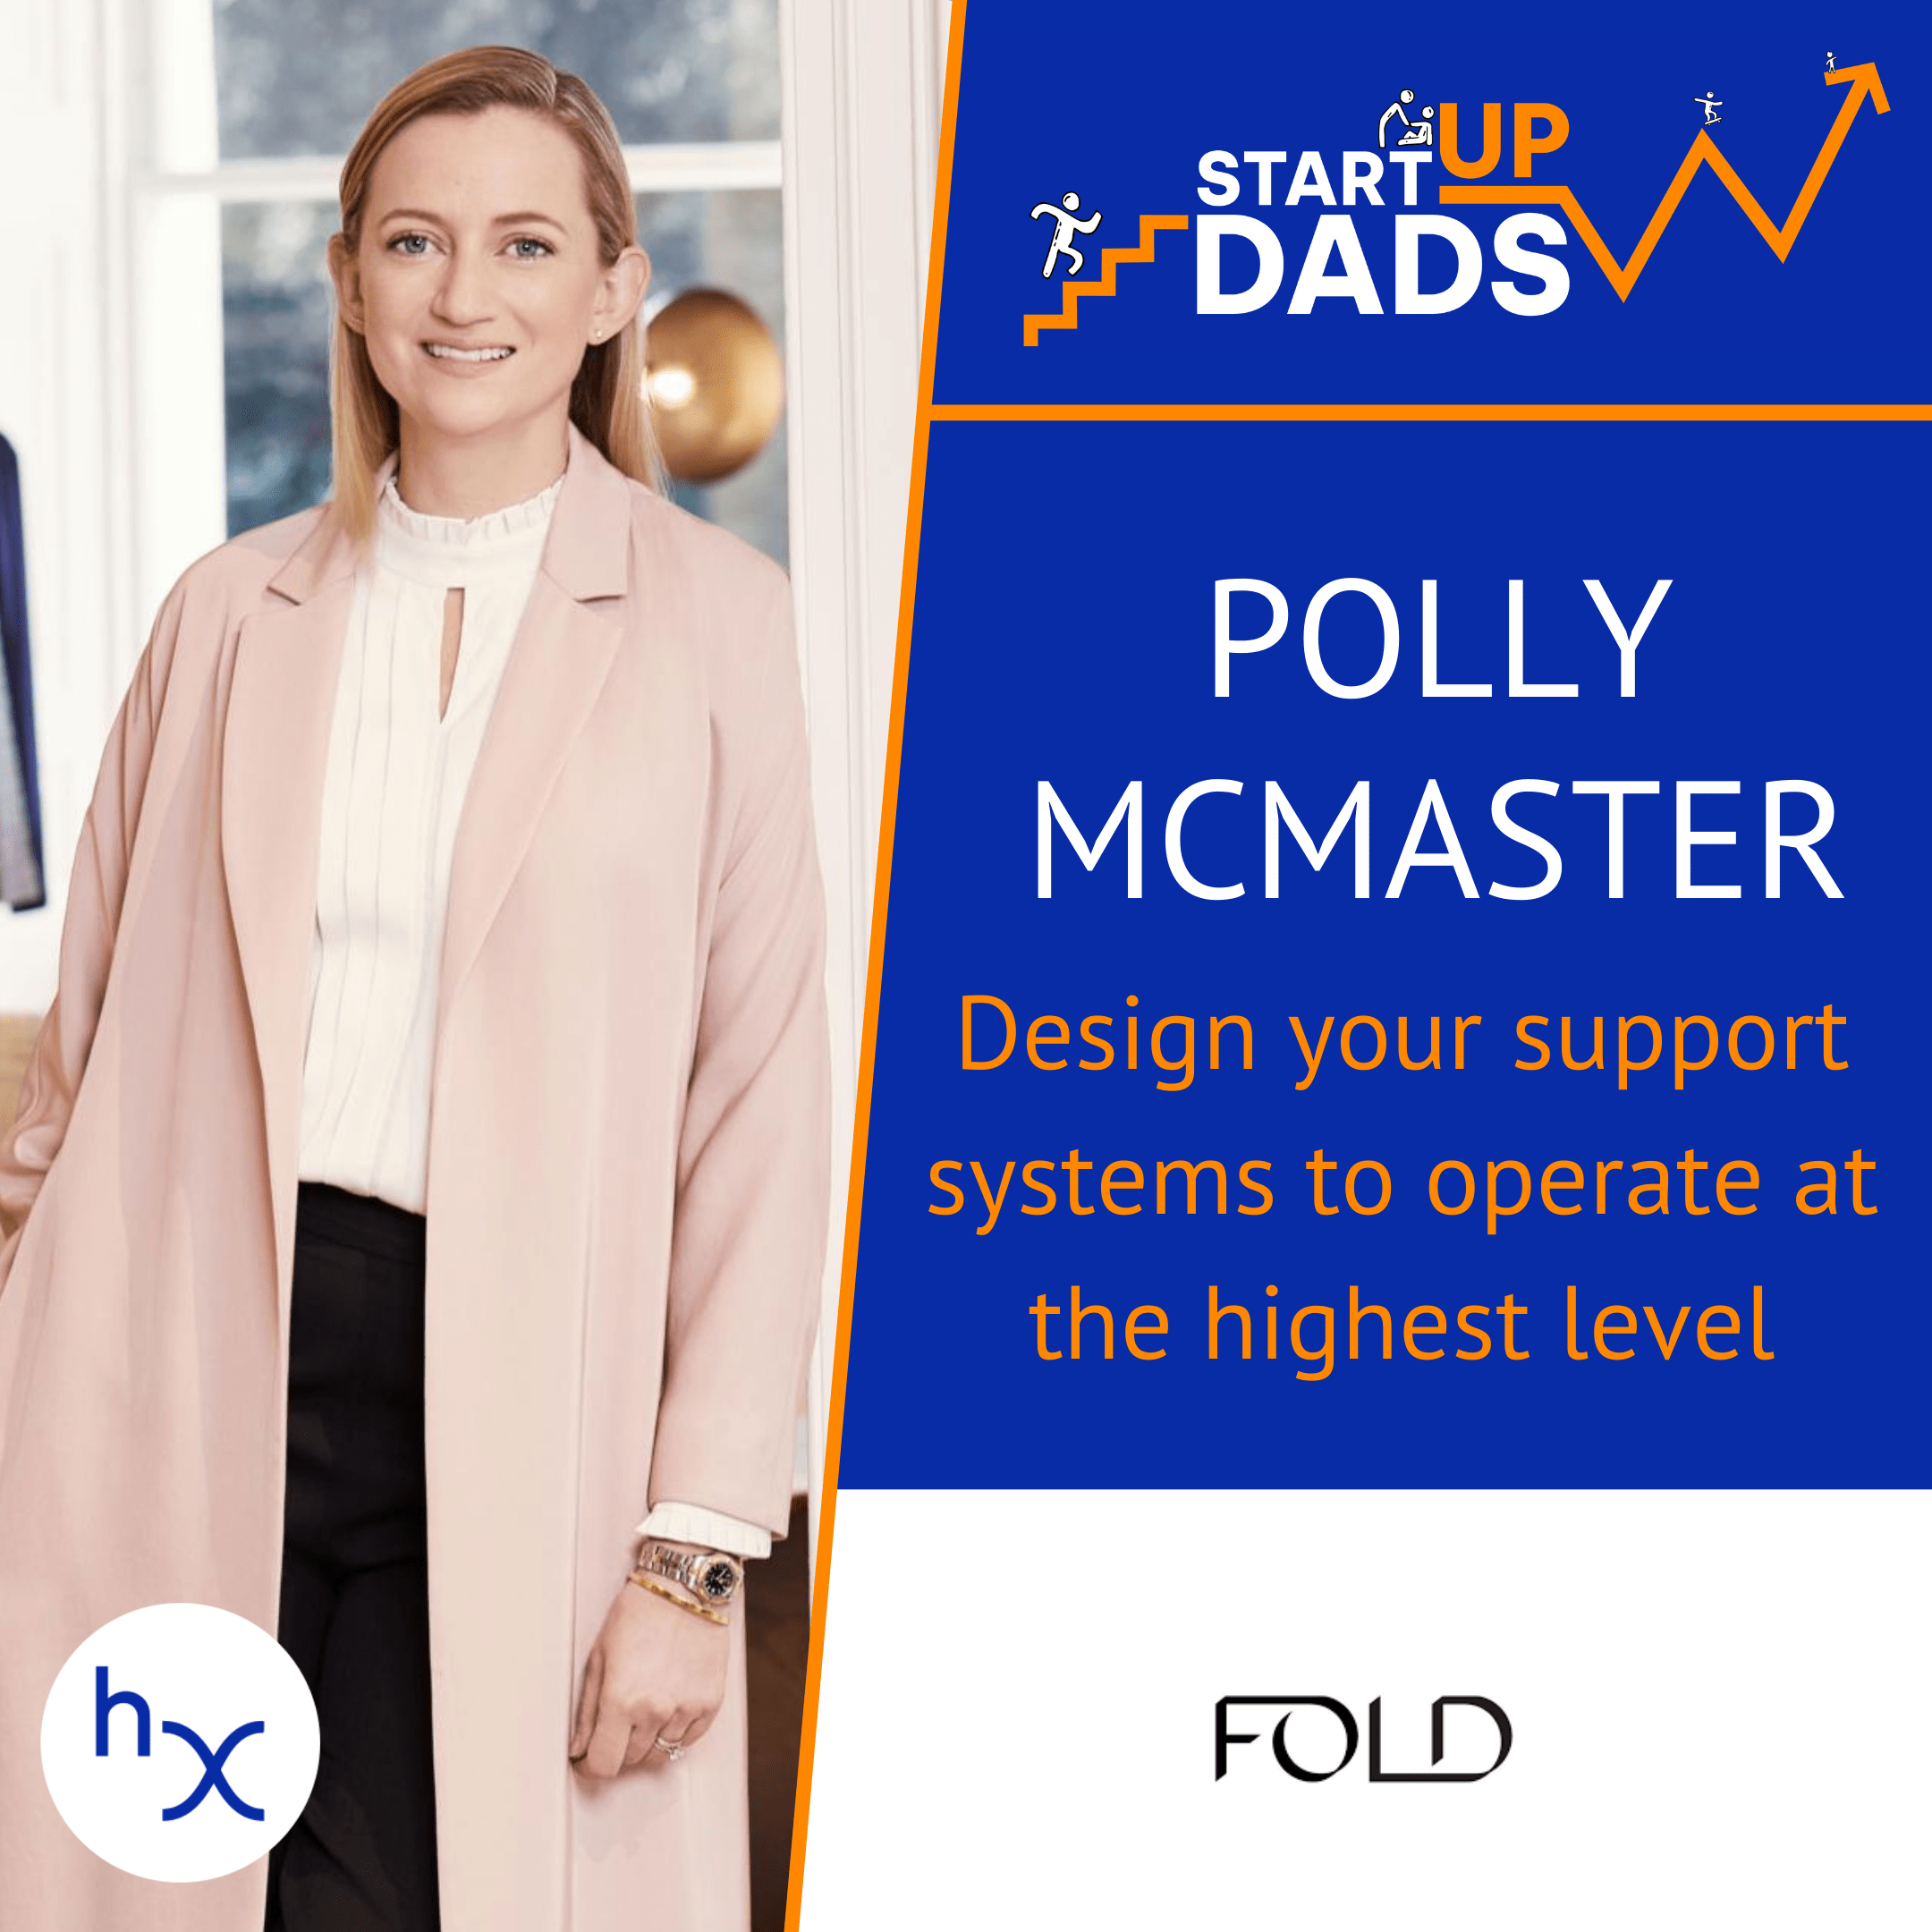 Design your support systems to operate at the highest level: Polly McMaster, The Fold